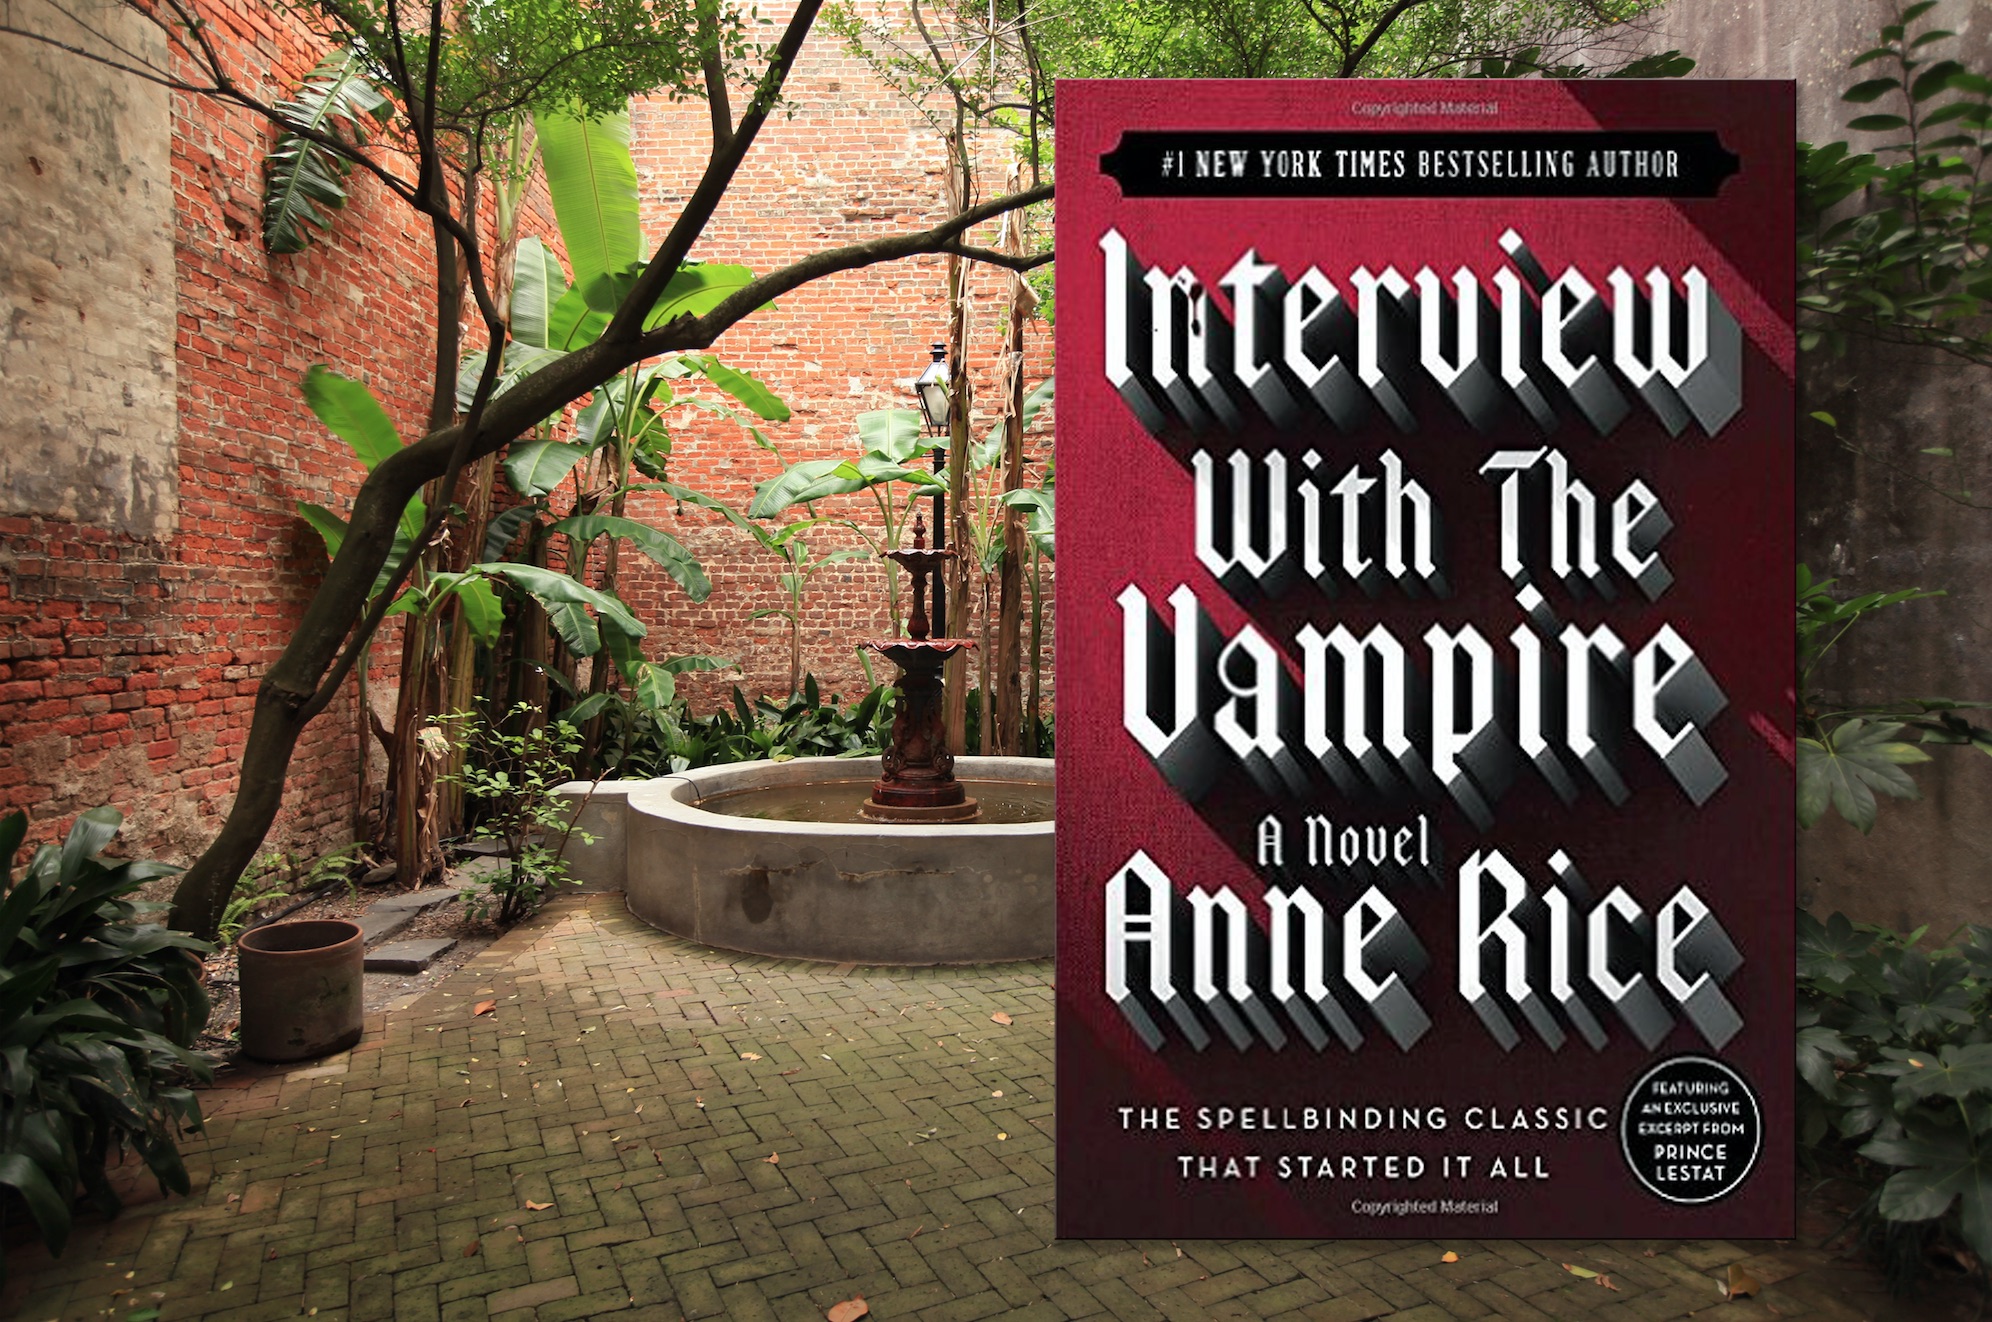 10 lower res interview with the vampire.jpg